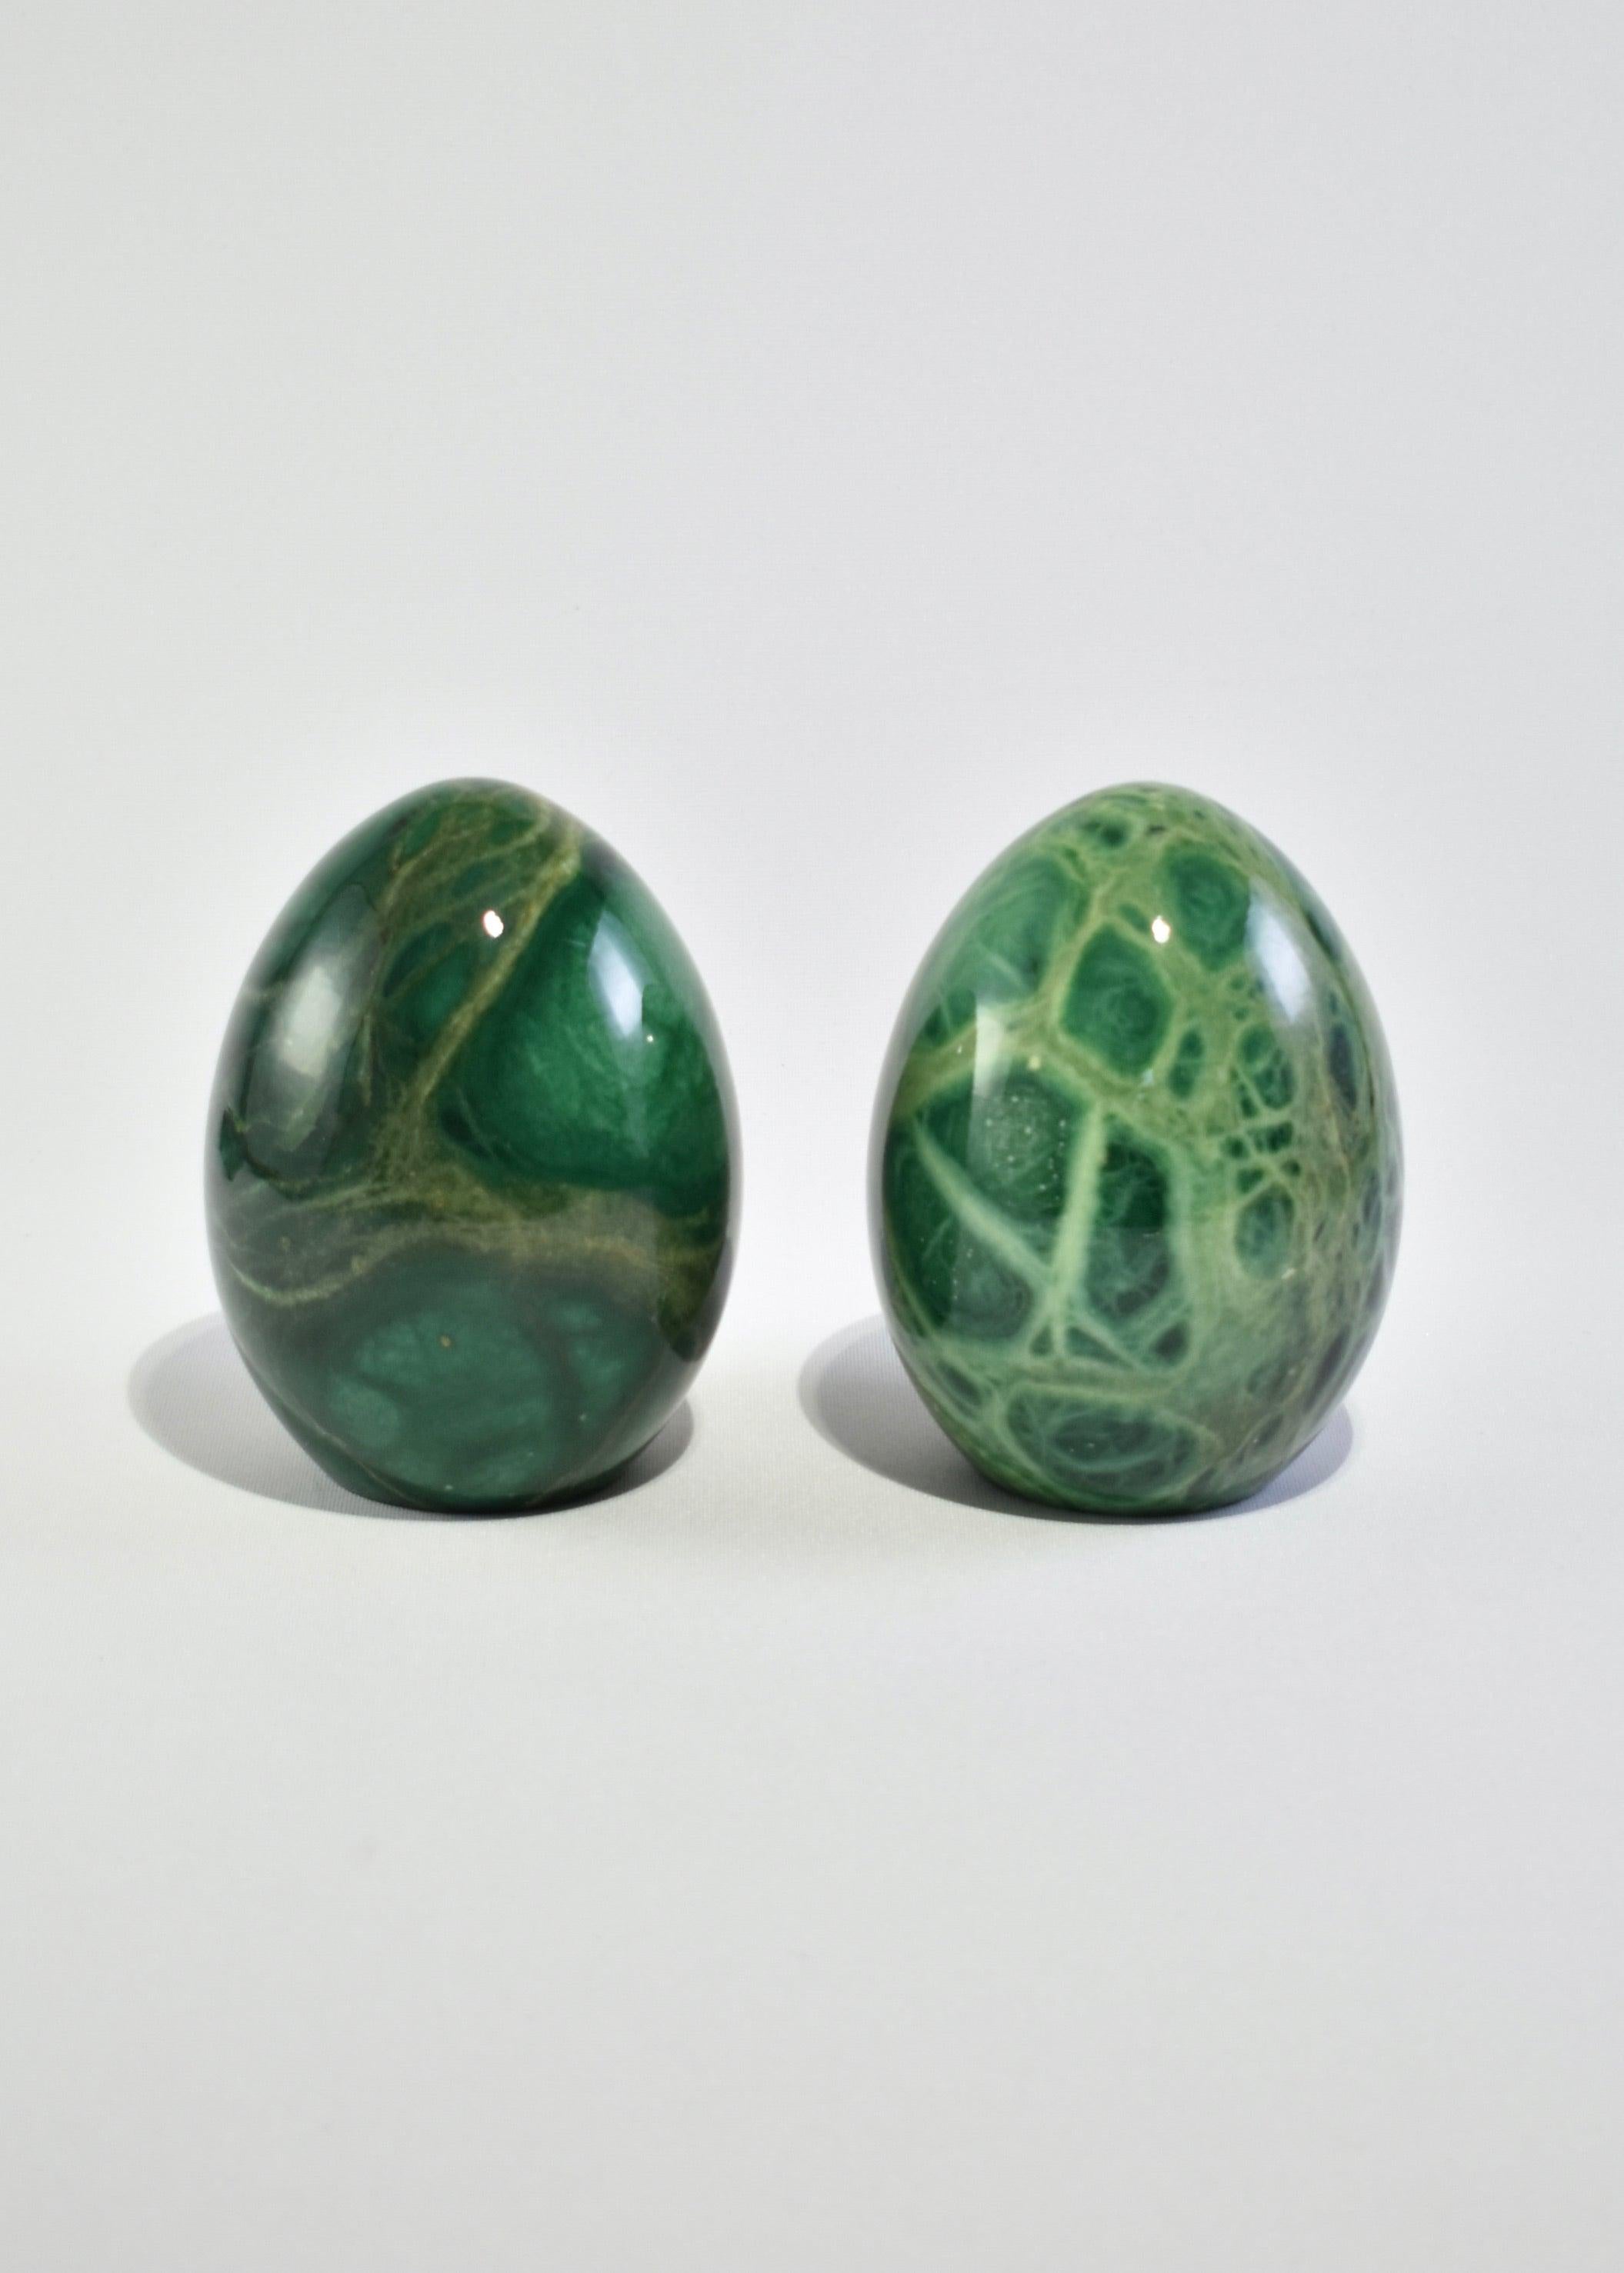 Stunning vintage green alabaster stone bookends in an egg shape, set of two. ?Made in Italy.?.